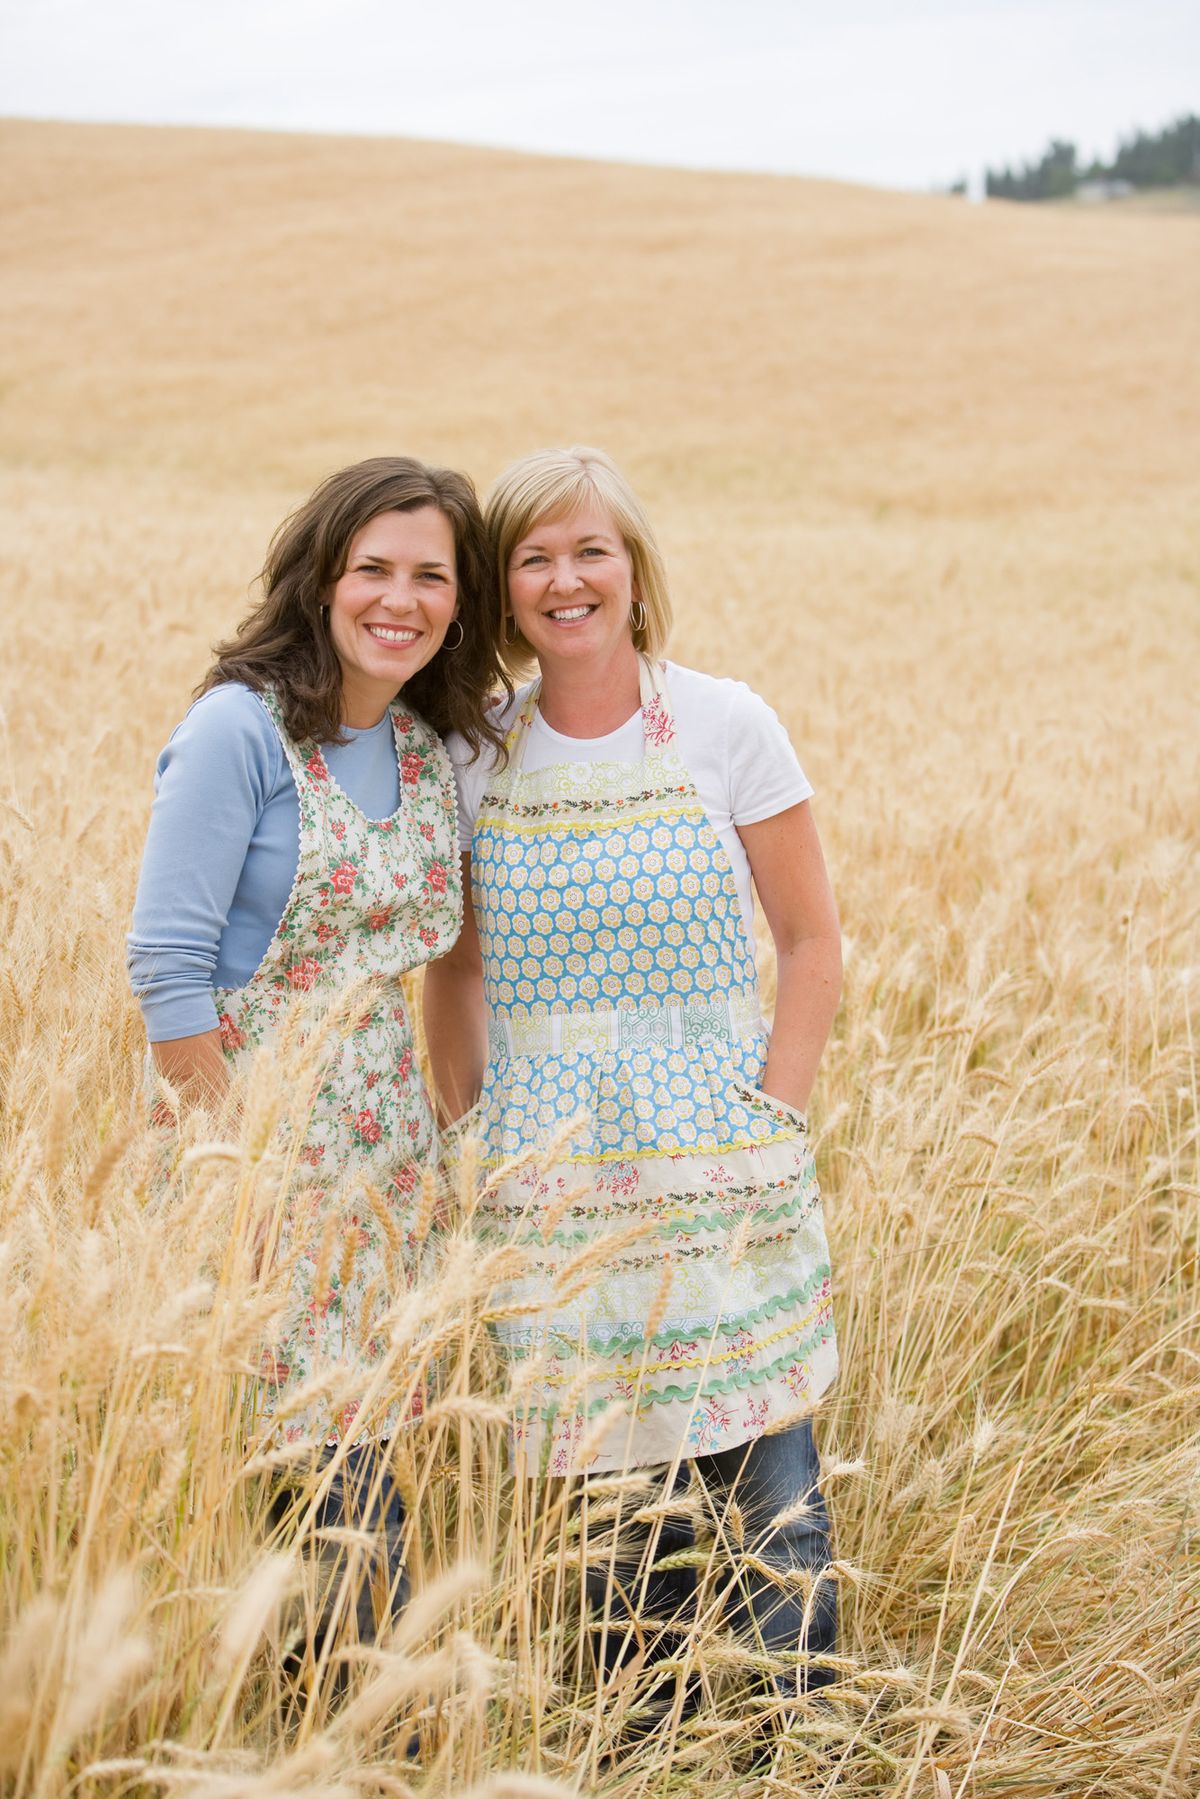 Farm Chicks Serena Thompson, left, and Teri Edwards are celebrating the release of their first book “The Farm Chicks in the Kitchen” and working on a second book of Christmas crafts and recipes.  (Copyright Granen / Photos courtesy of “The Farm Chicks in the Kitchen”)